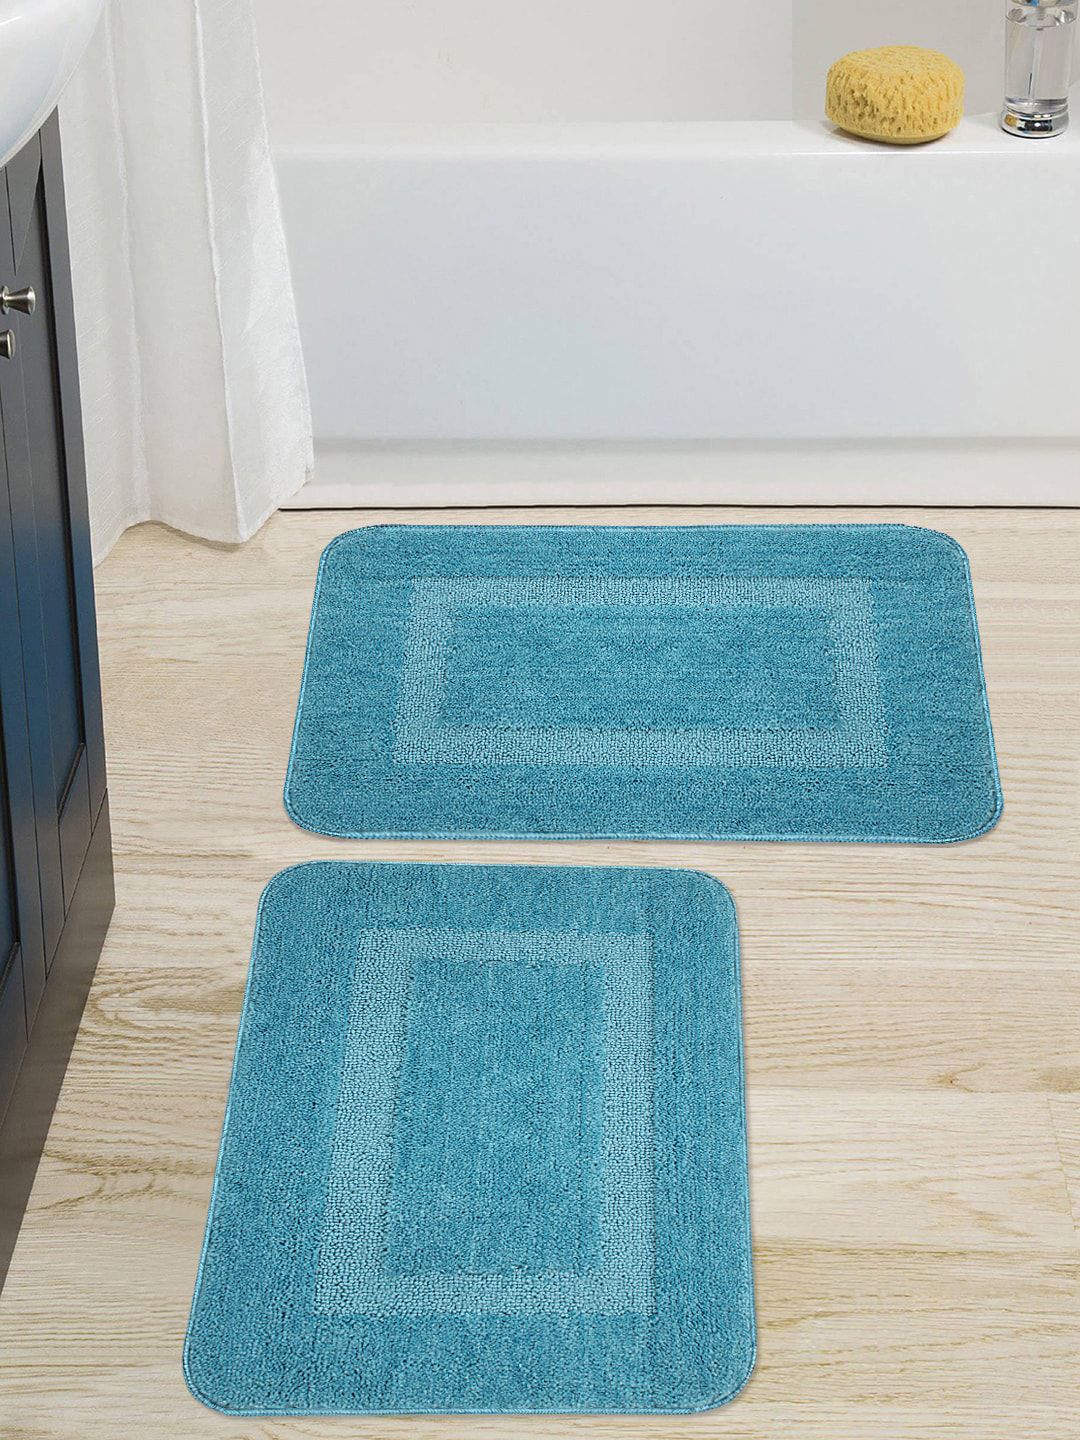 Saral Home Set of 2 Blue Woven-Design Anti-Skid Bath Mats Price in India